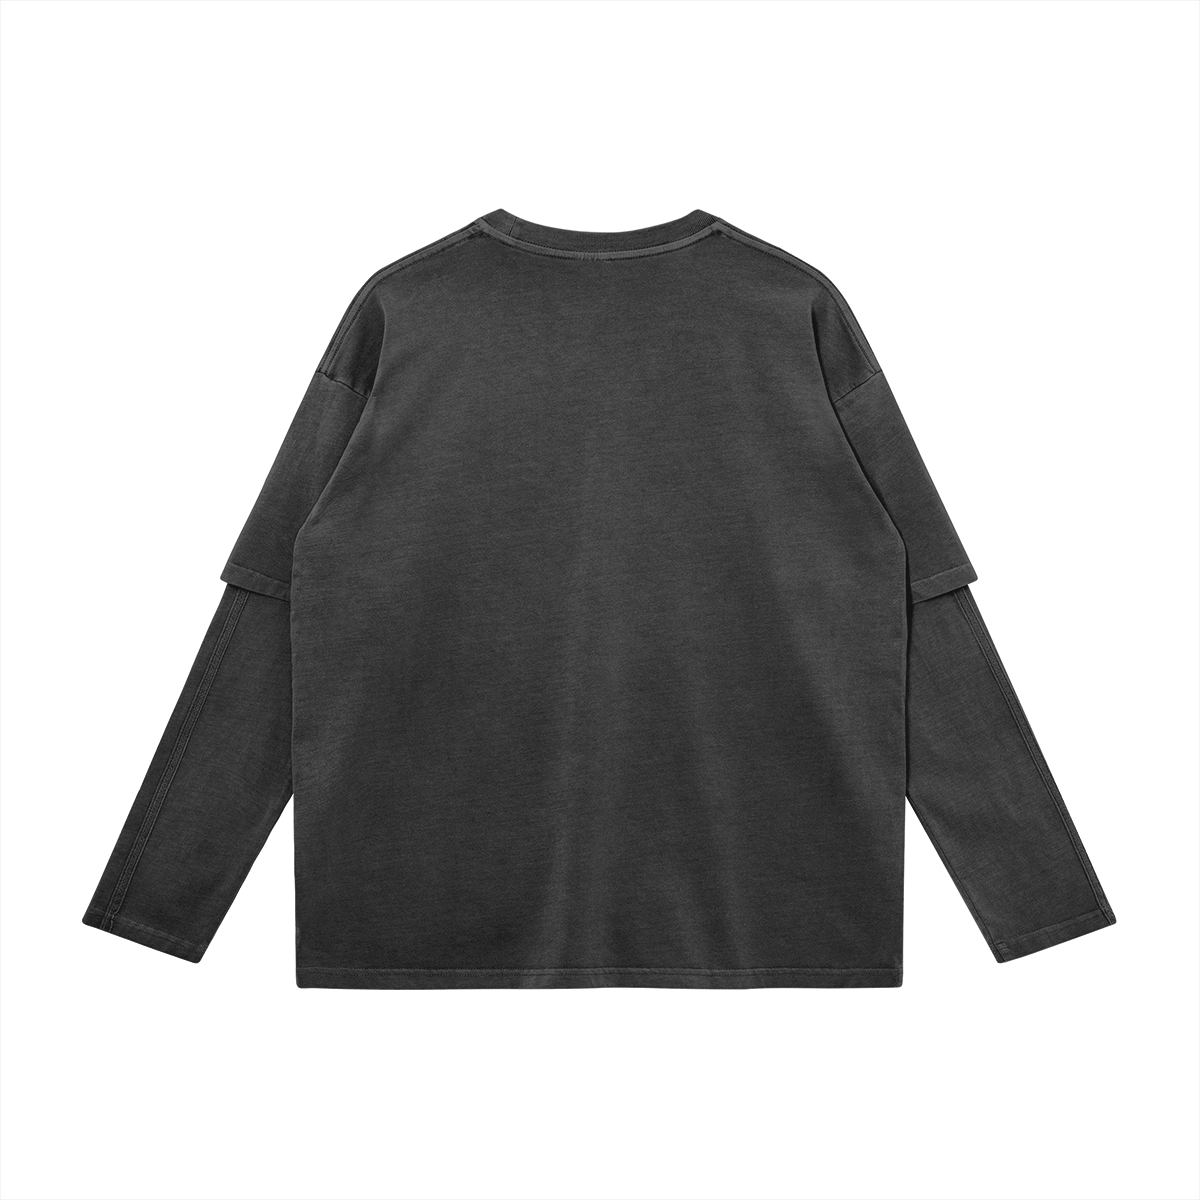 Landon West® Faux-layered Faded Long Sleeve